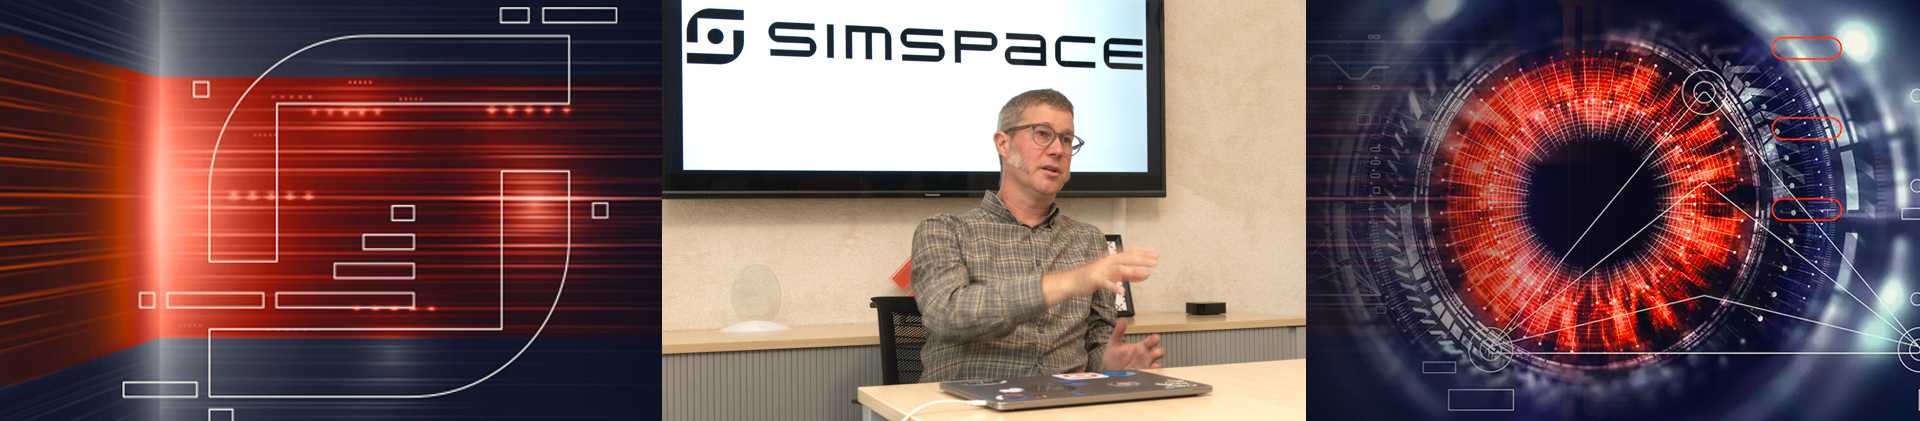 SimSpace is in Europe